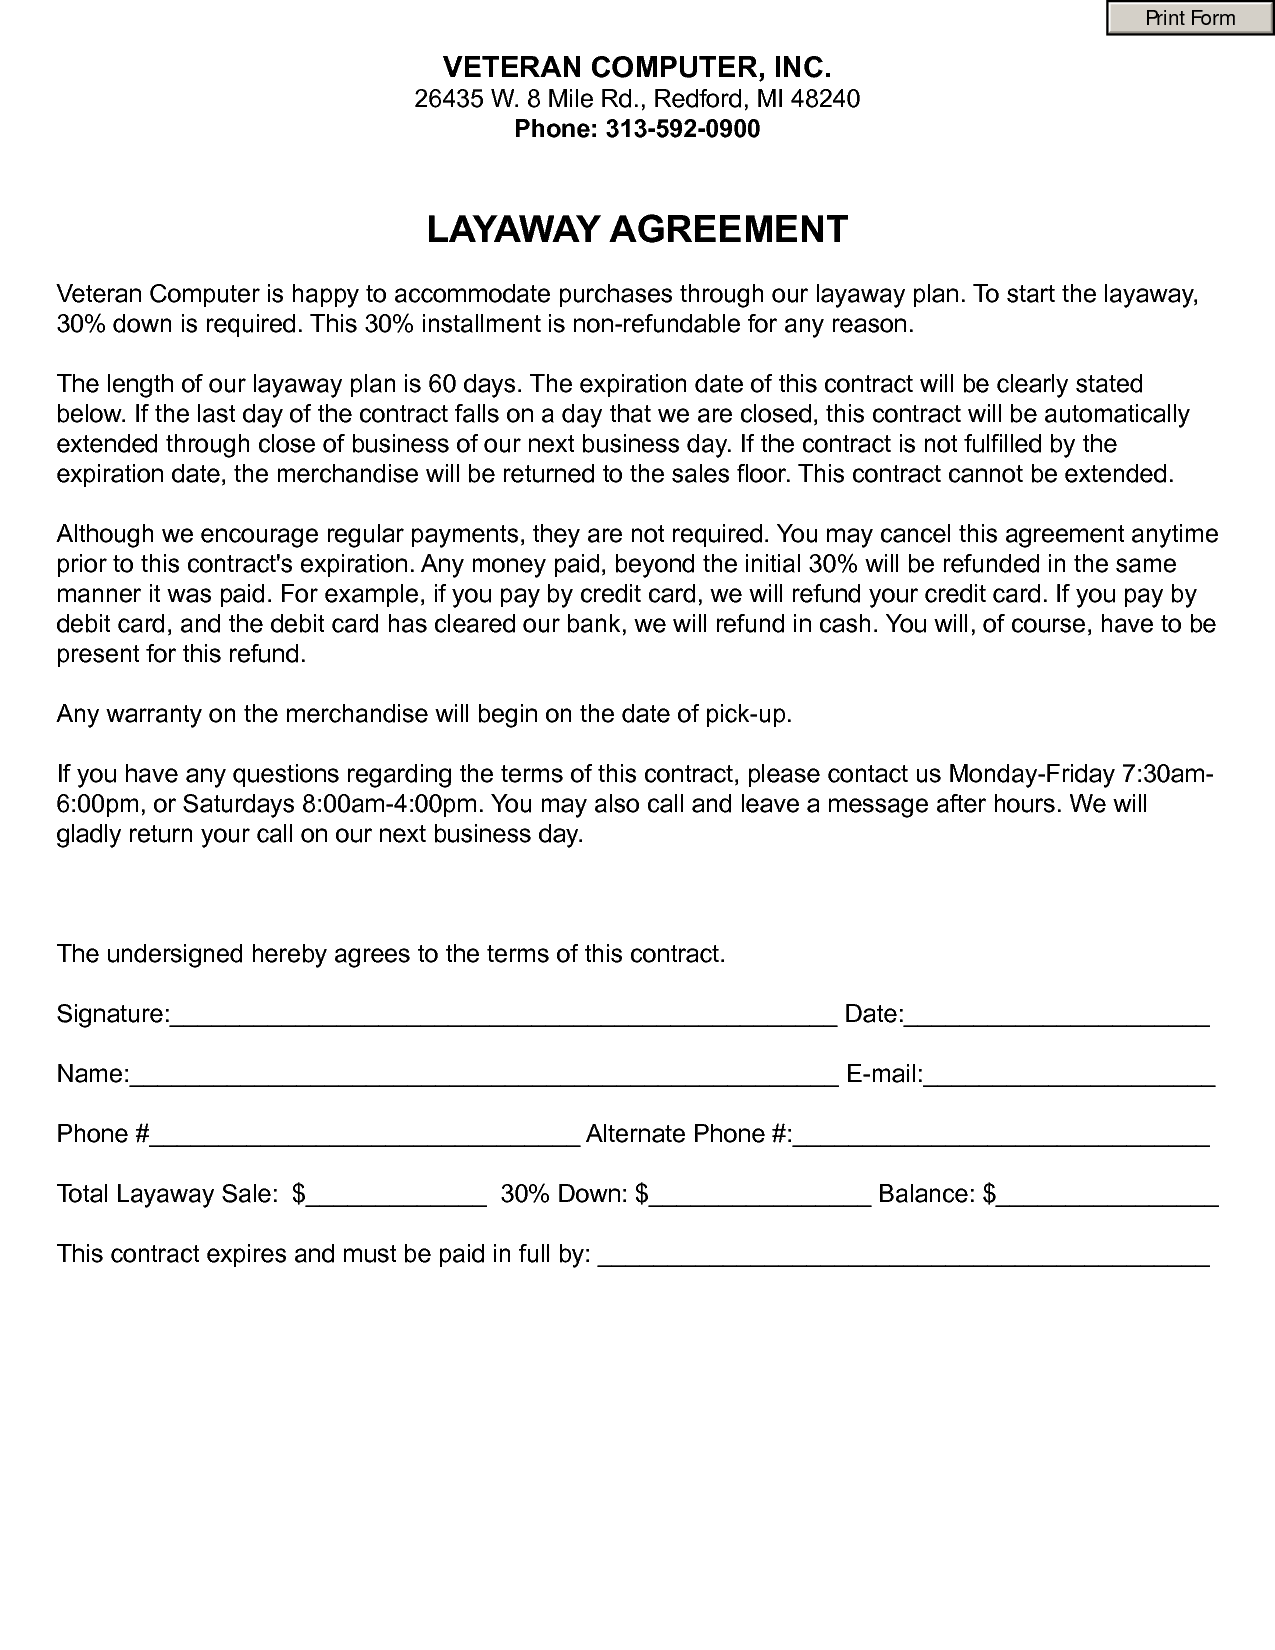 5 Best Images of Free Printable Layaway Forms Free Layaway Agreement